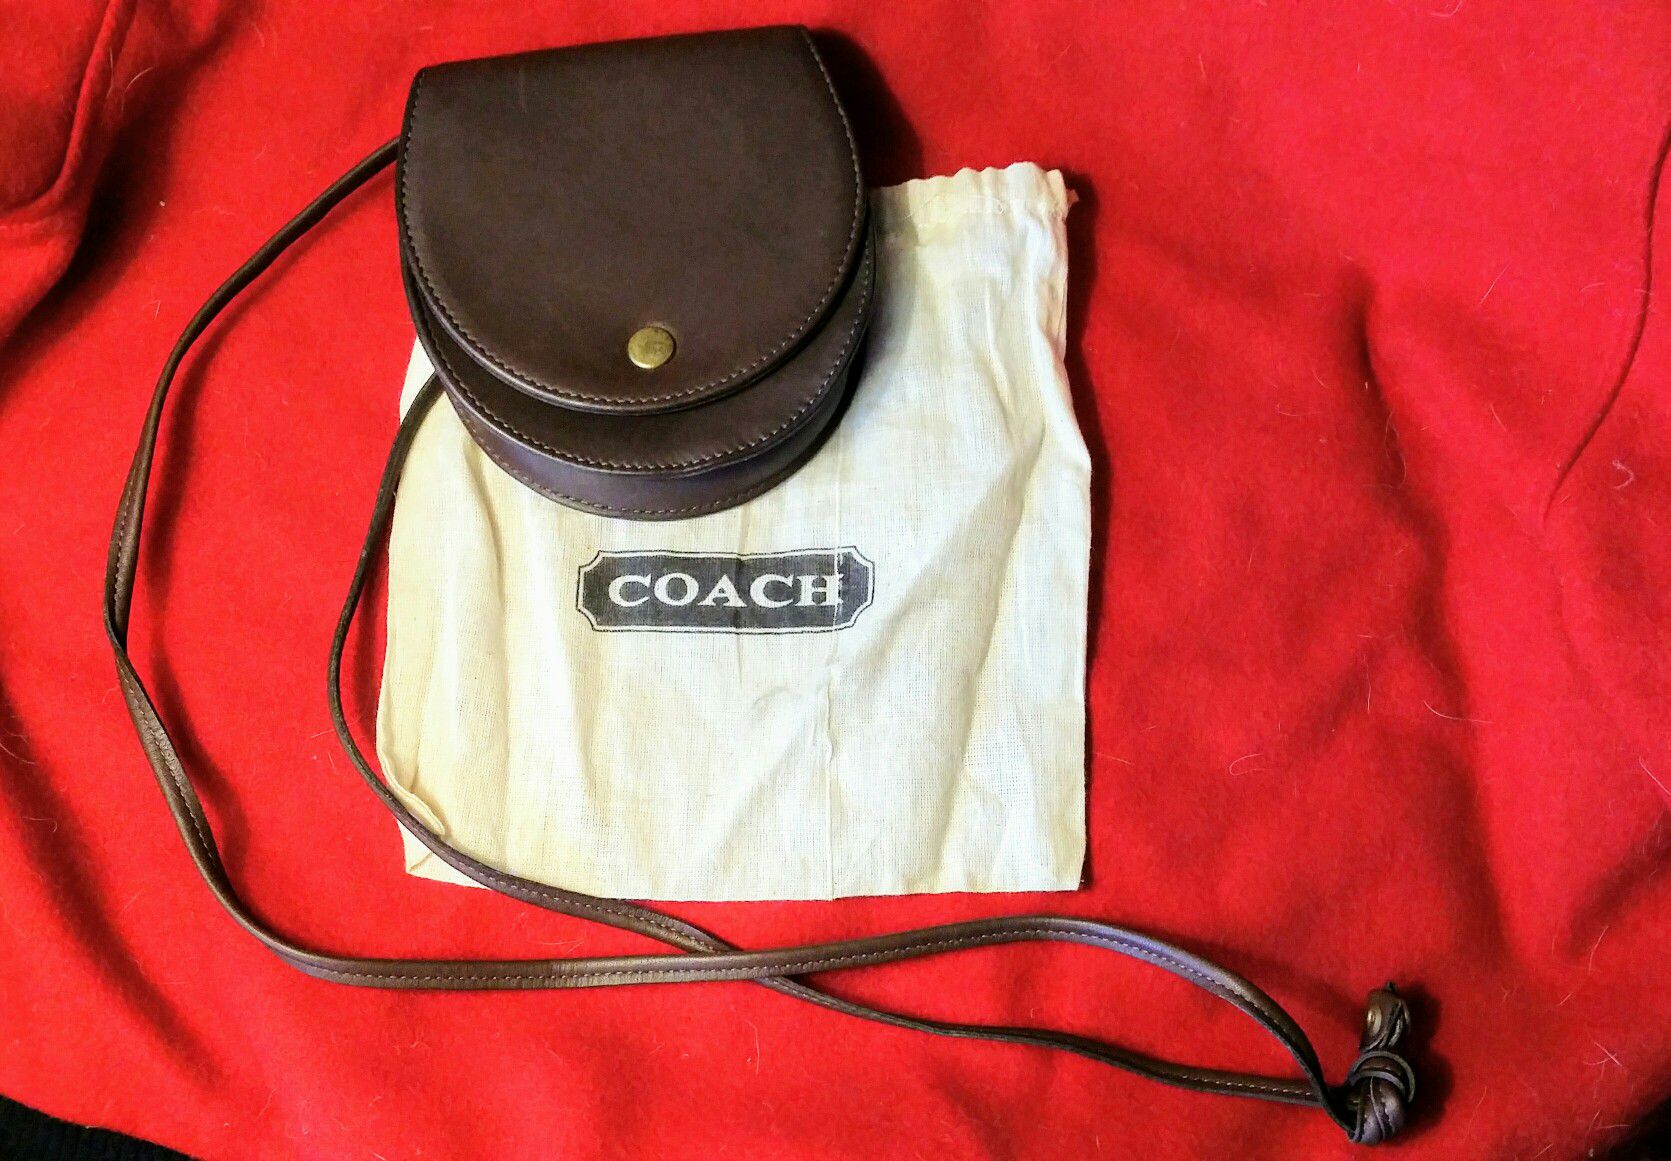 Couch purse Make offer